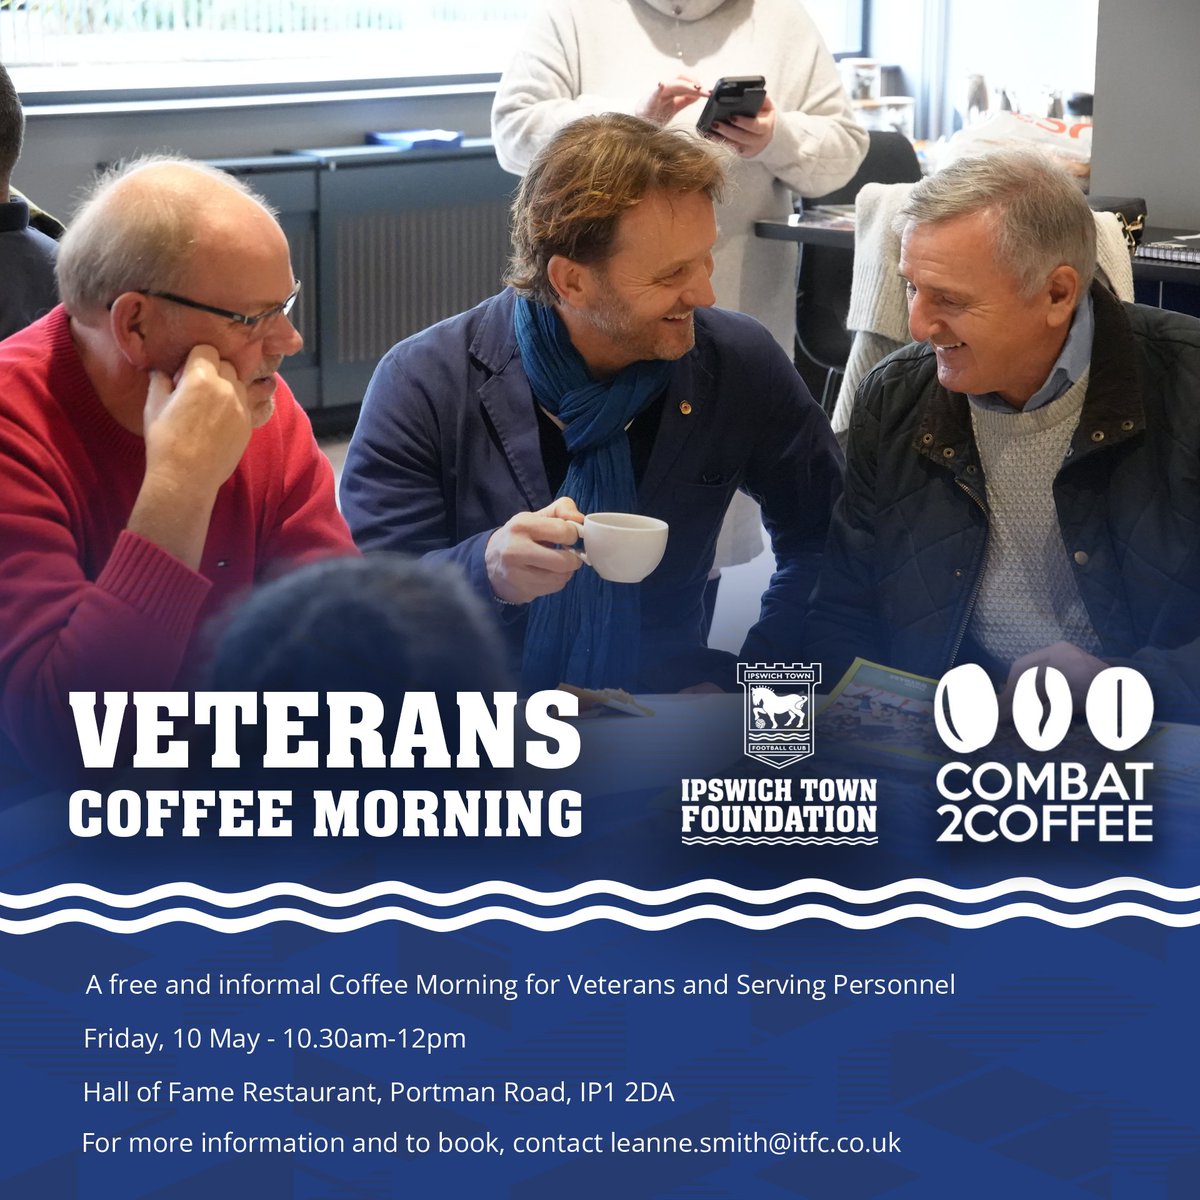 ☕️ The Foundation is hosting a Coffee Morning for Veterans and Serving Personnel at Portman Road on Friday, 10 May. The event is free to attend, and will take place in the Hall of Fame Restaurant. To register your interest, contact leanne.smith@itfc.co.uk. @Combat2C